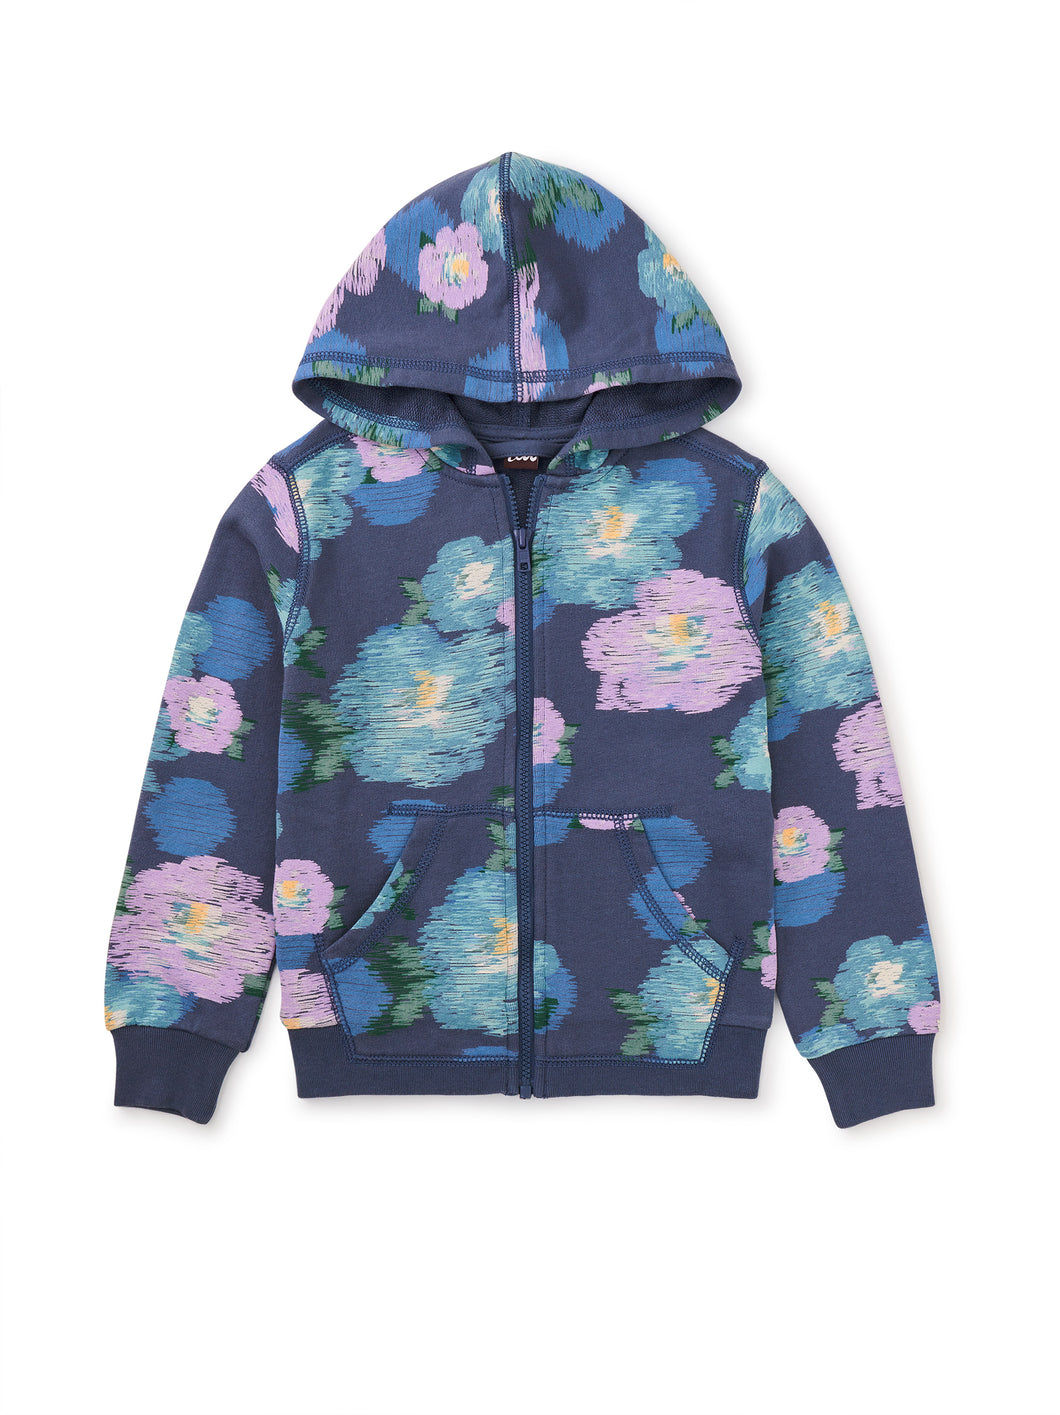 Tea Collection Good Sport Hoodie - Impressionist Roses